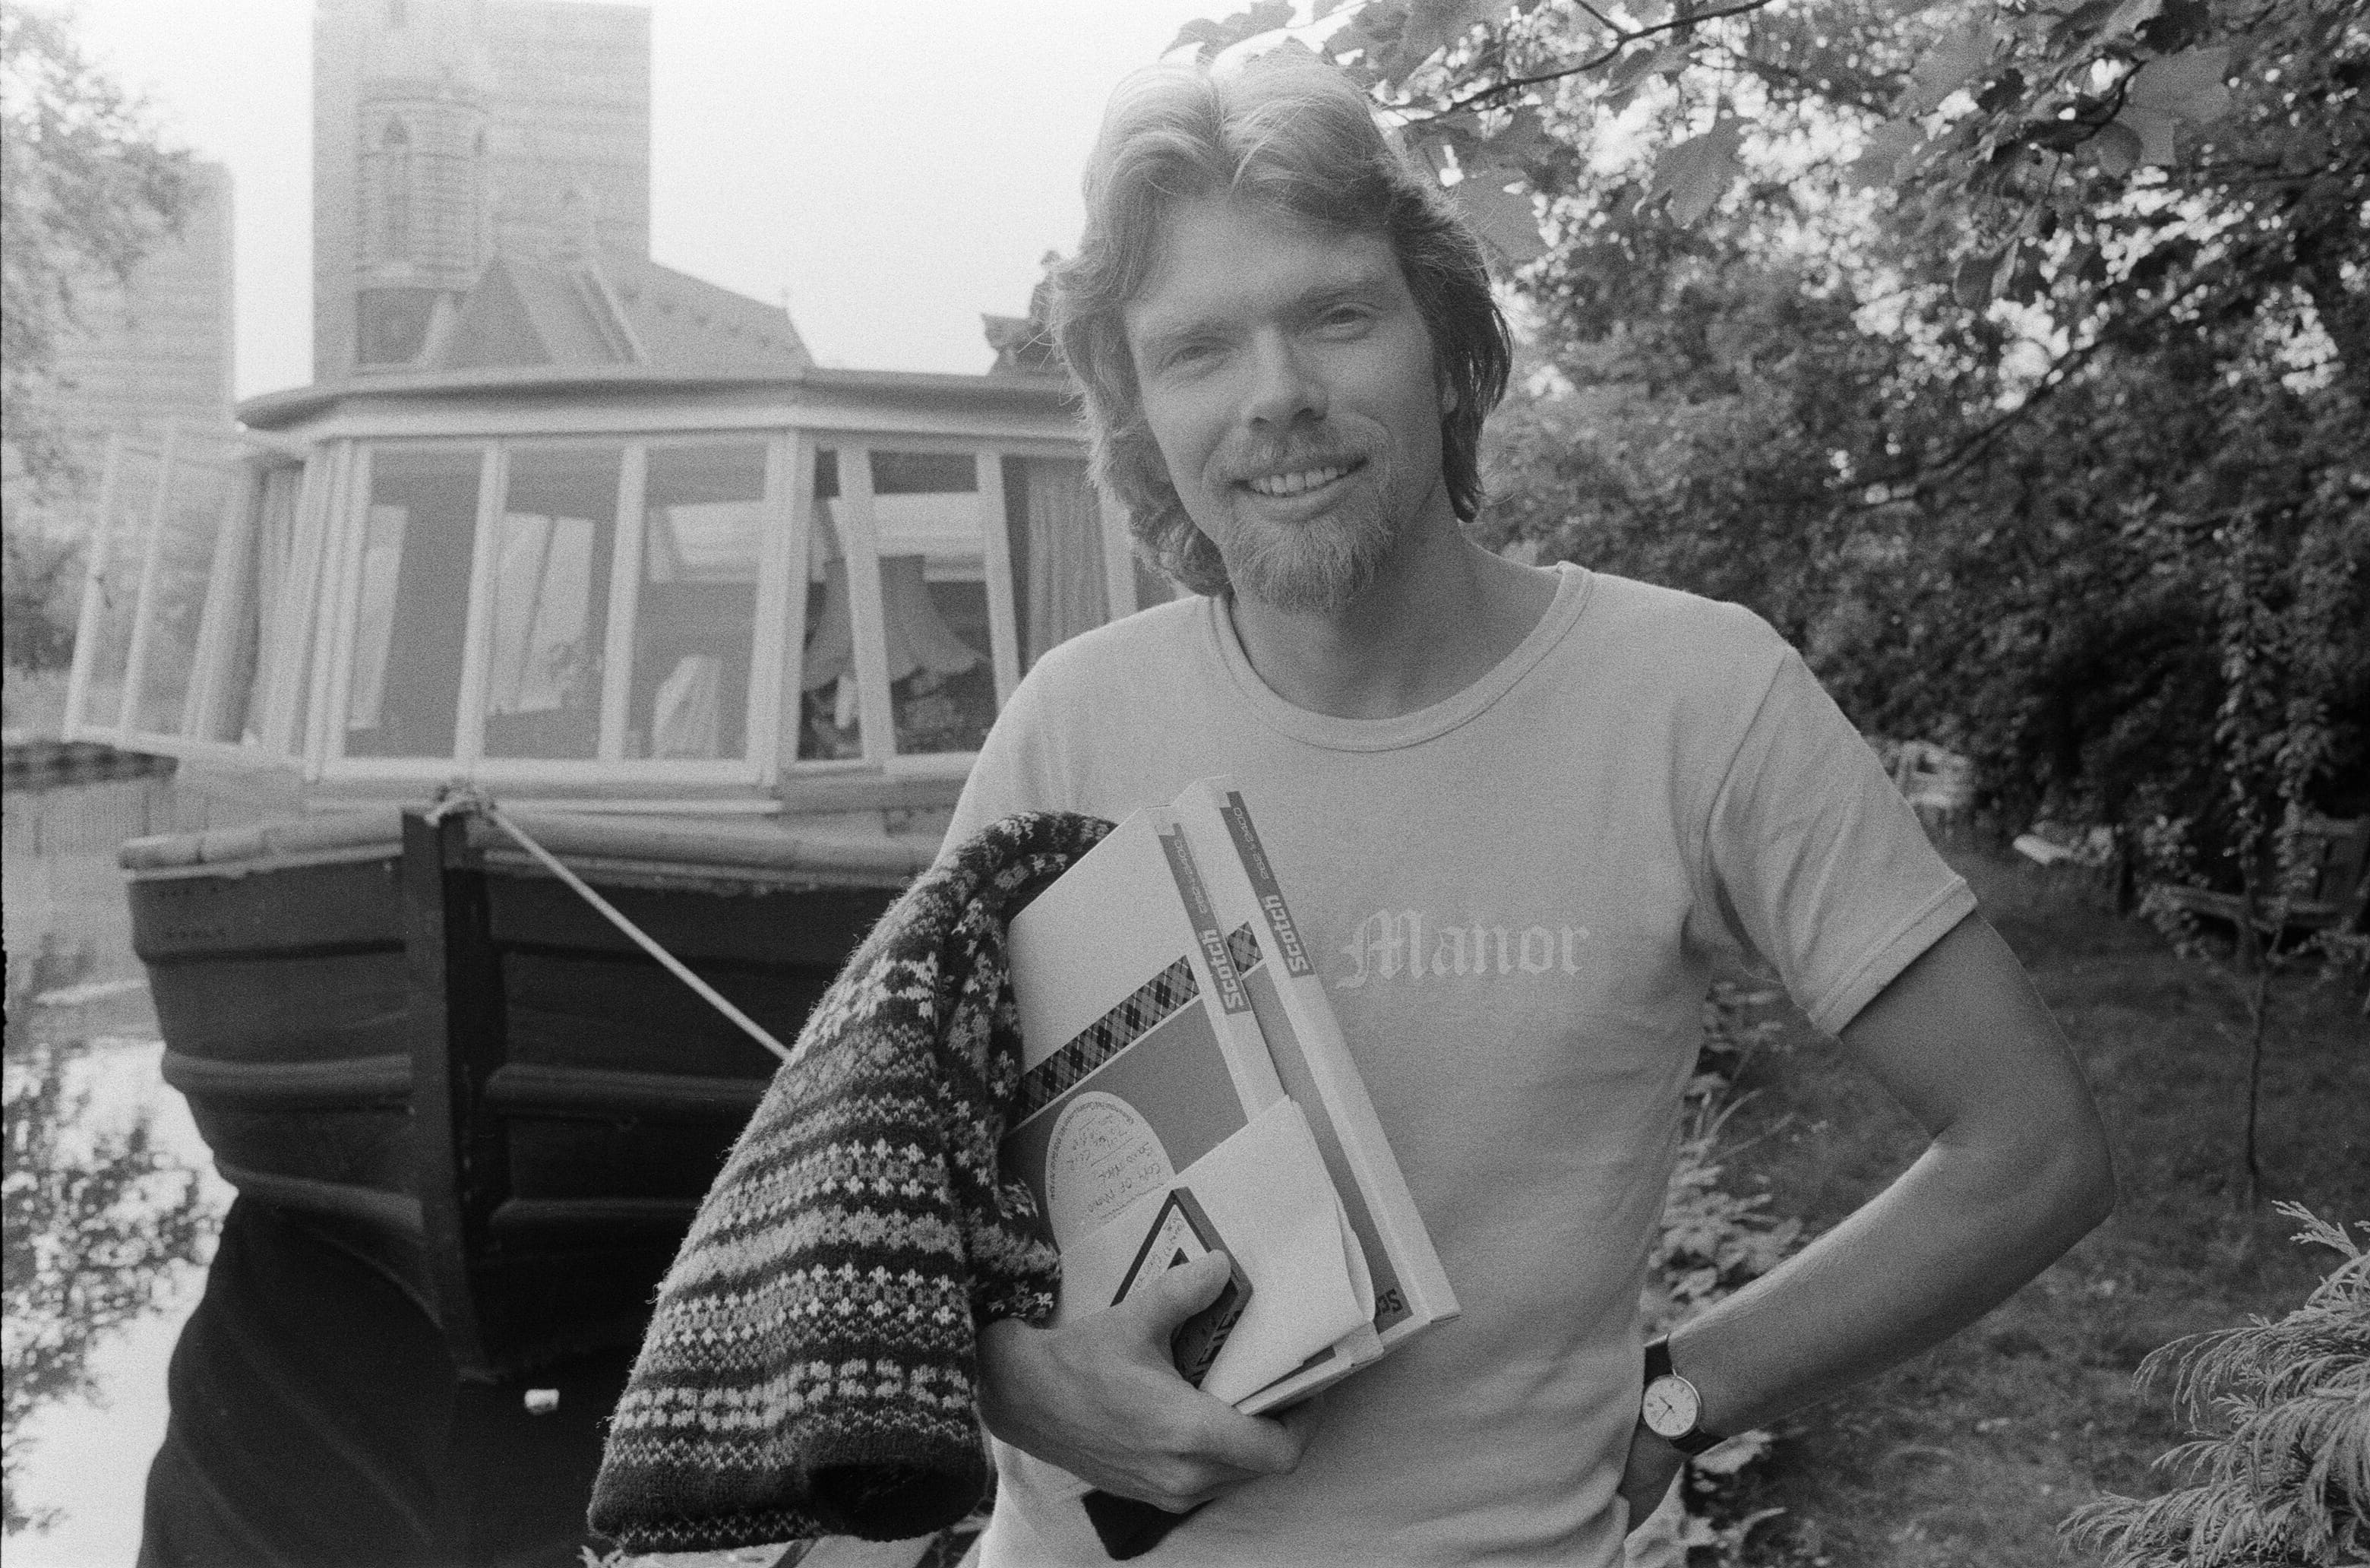 The first home Richard Branson bought was a houseboat